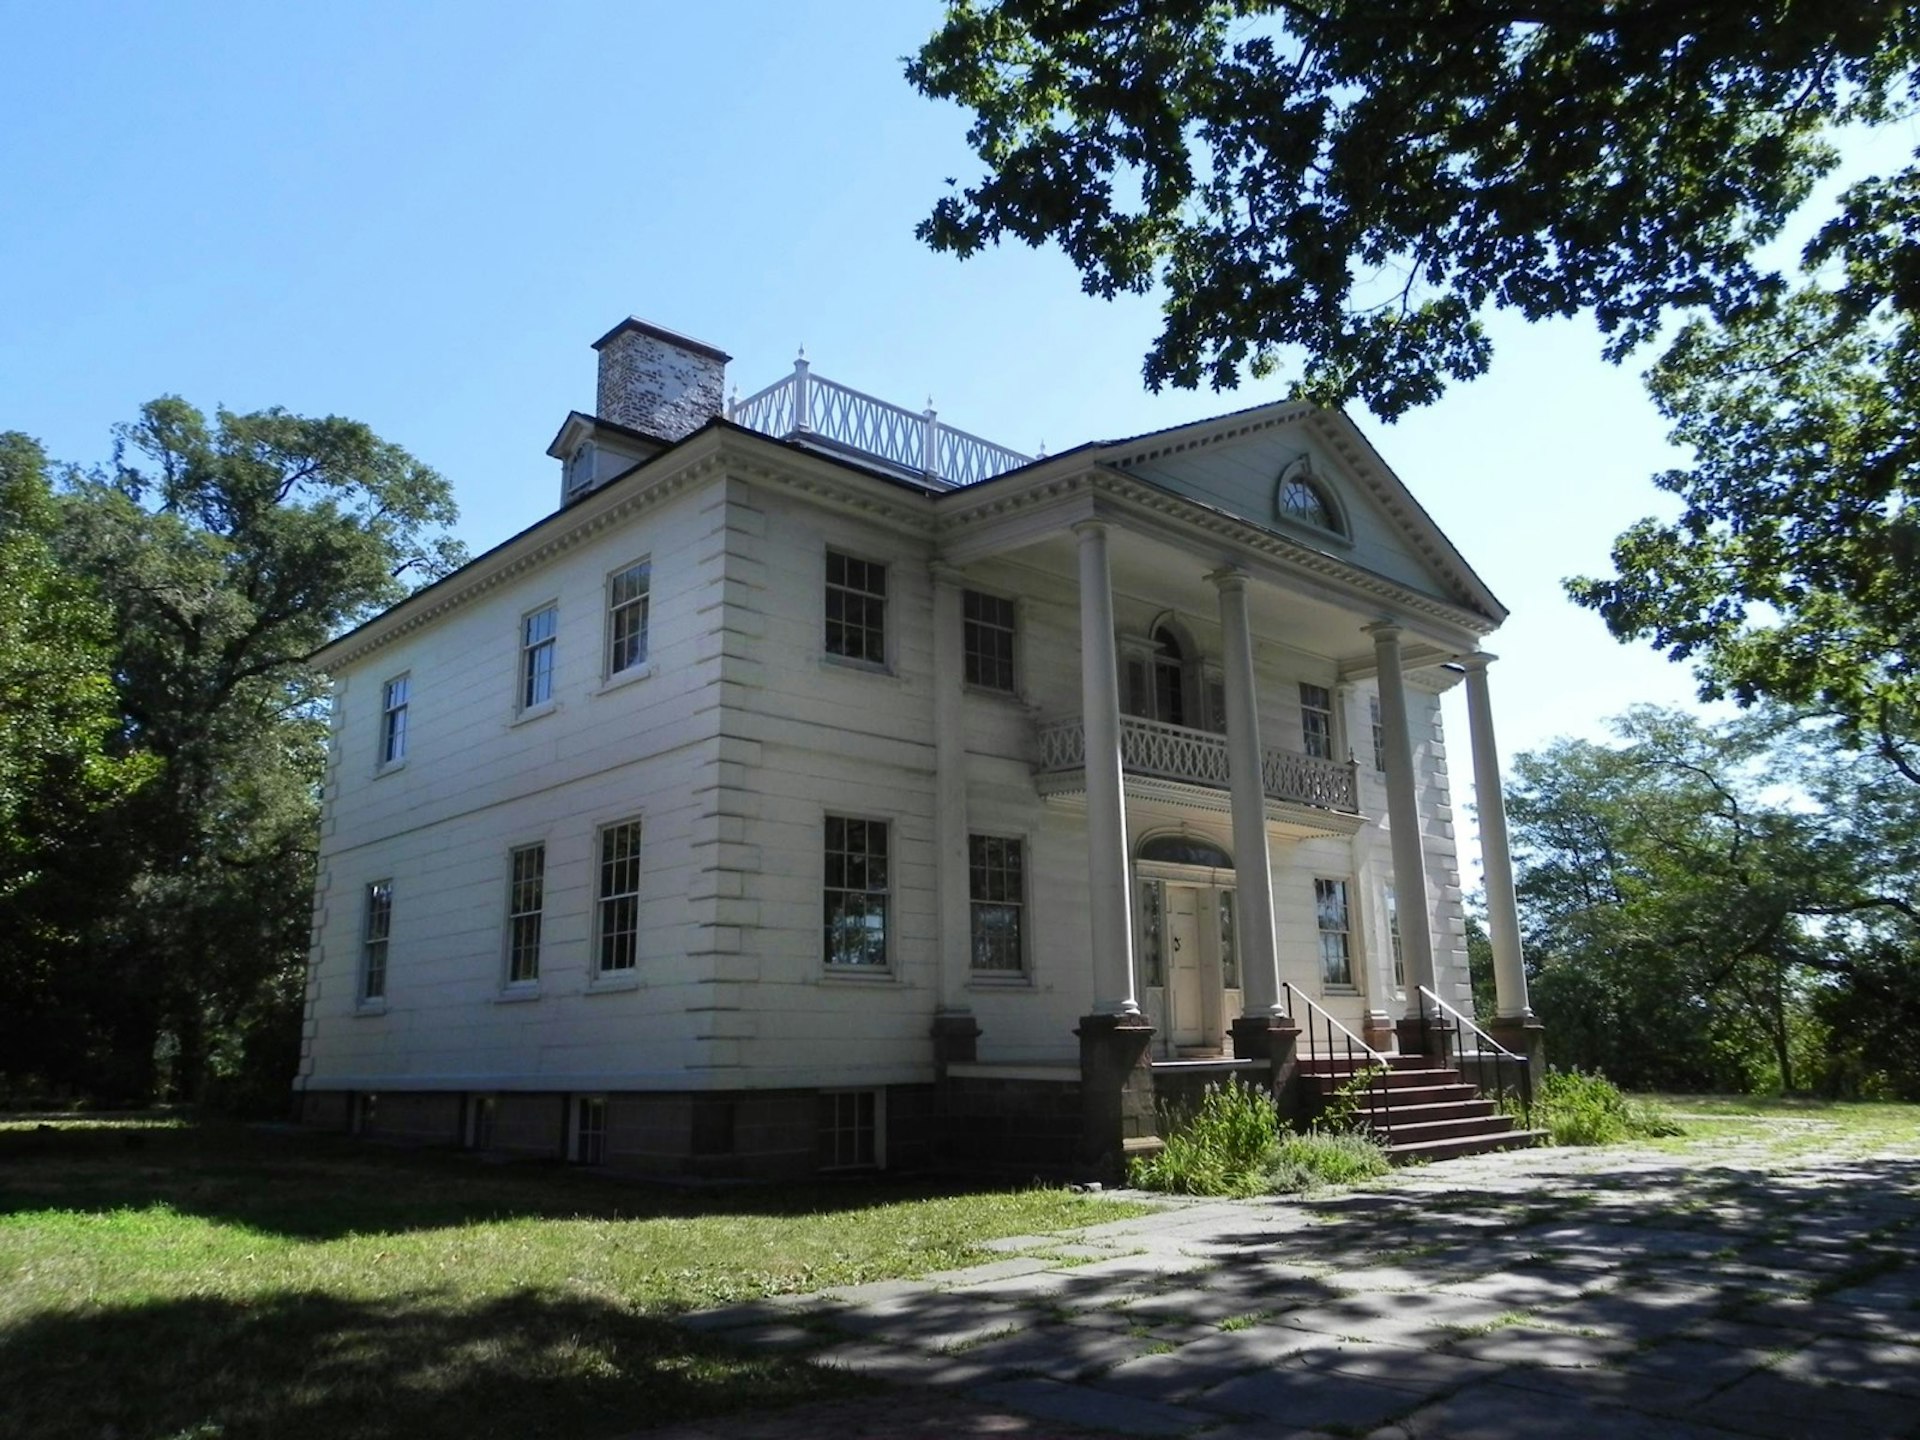 The exterior of the Morris-Jumel Mansion under a blue sky; historic homes